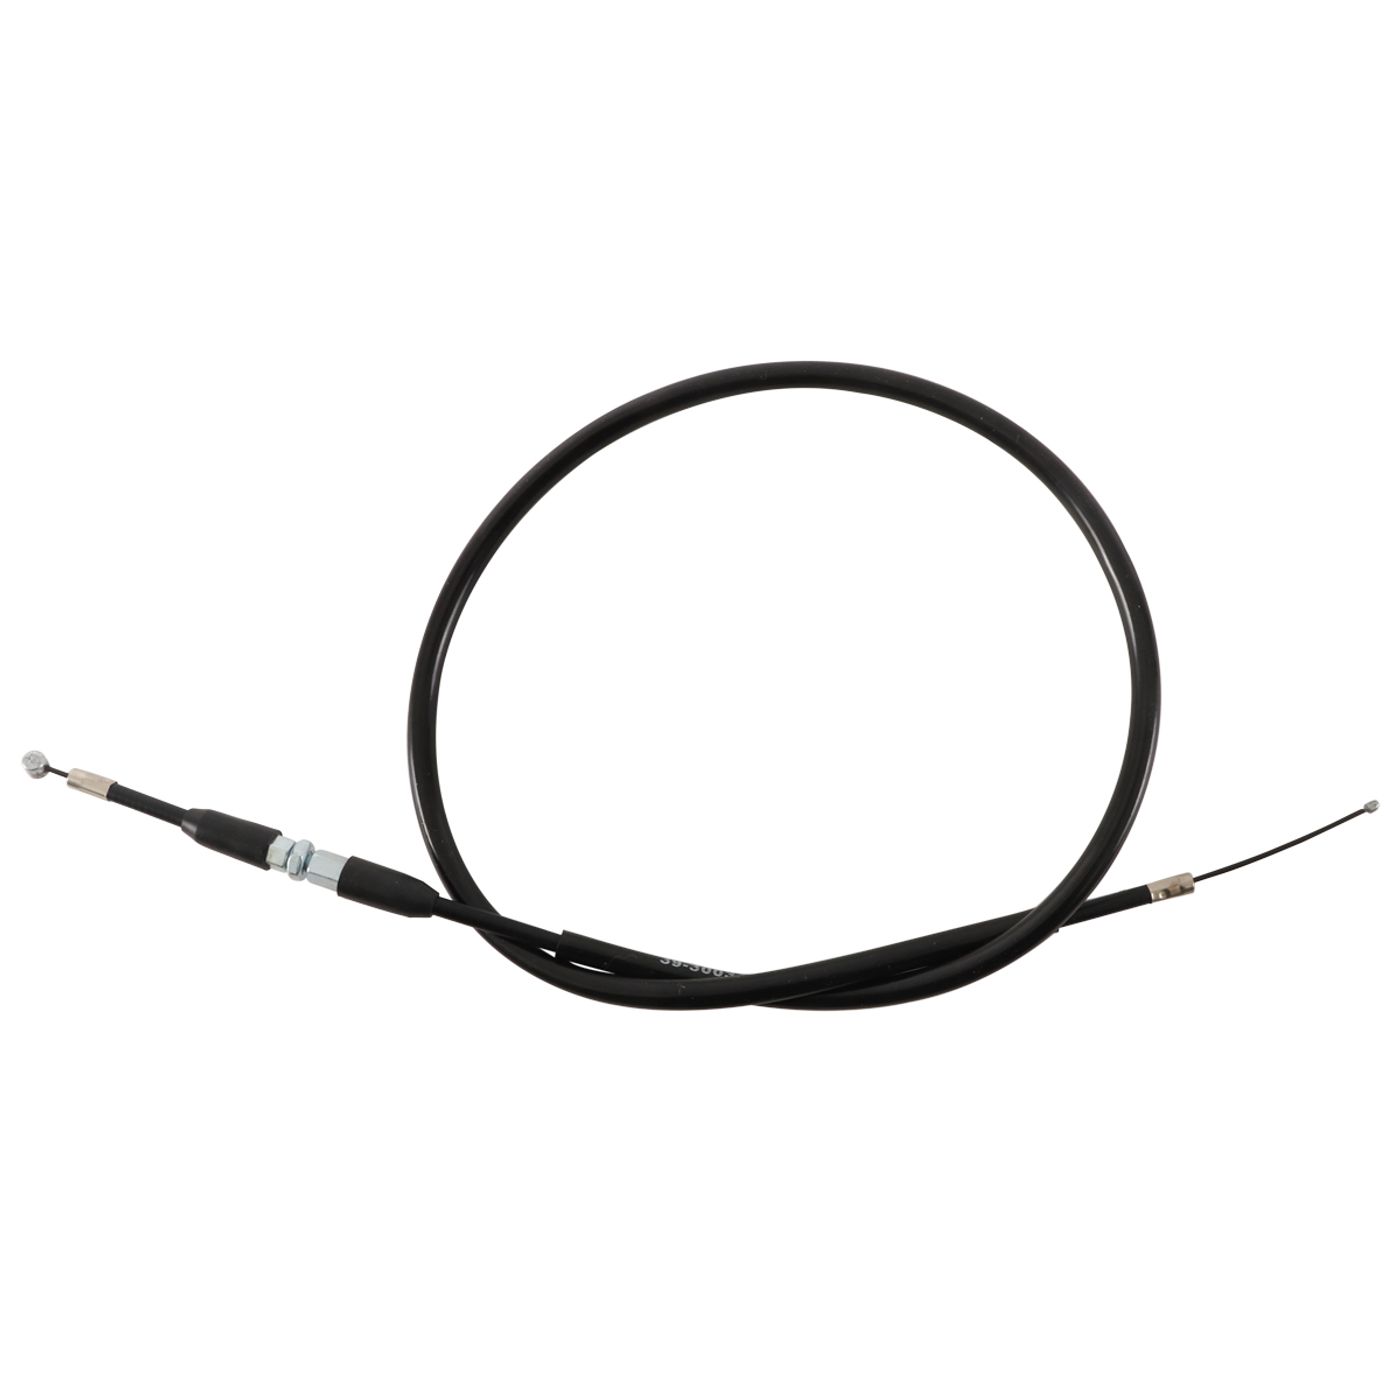 Wrp Clutch Cables - WRP453004 image